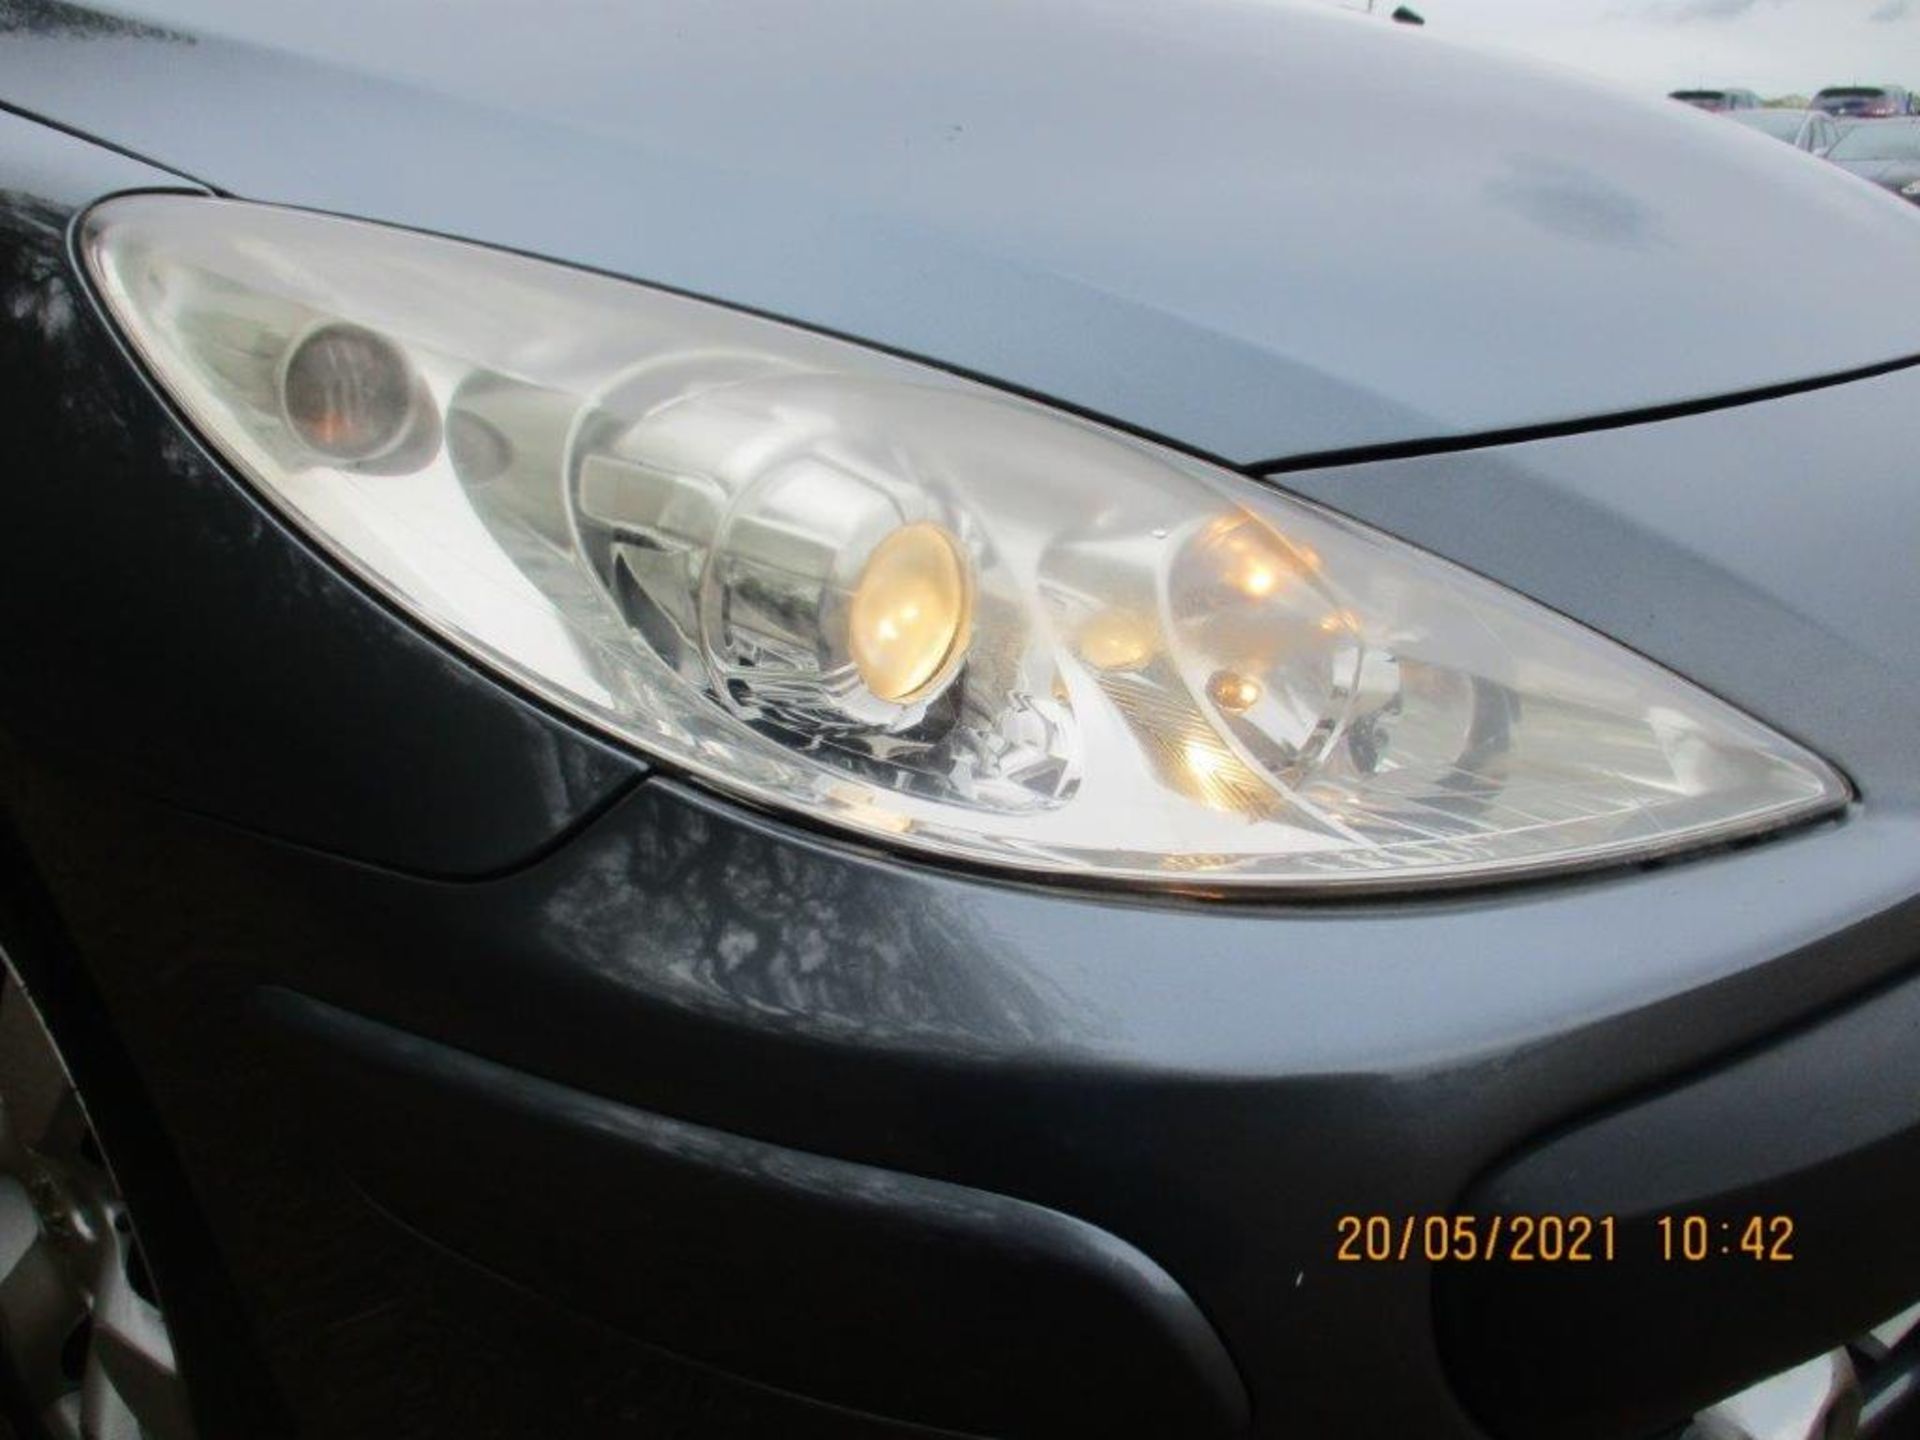 57 07 Peugeot 307 S HDI - Image 11 of 18